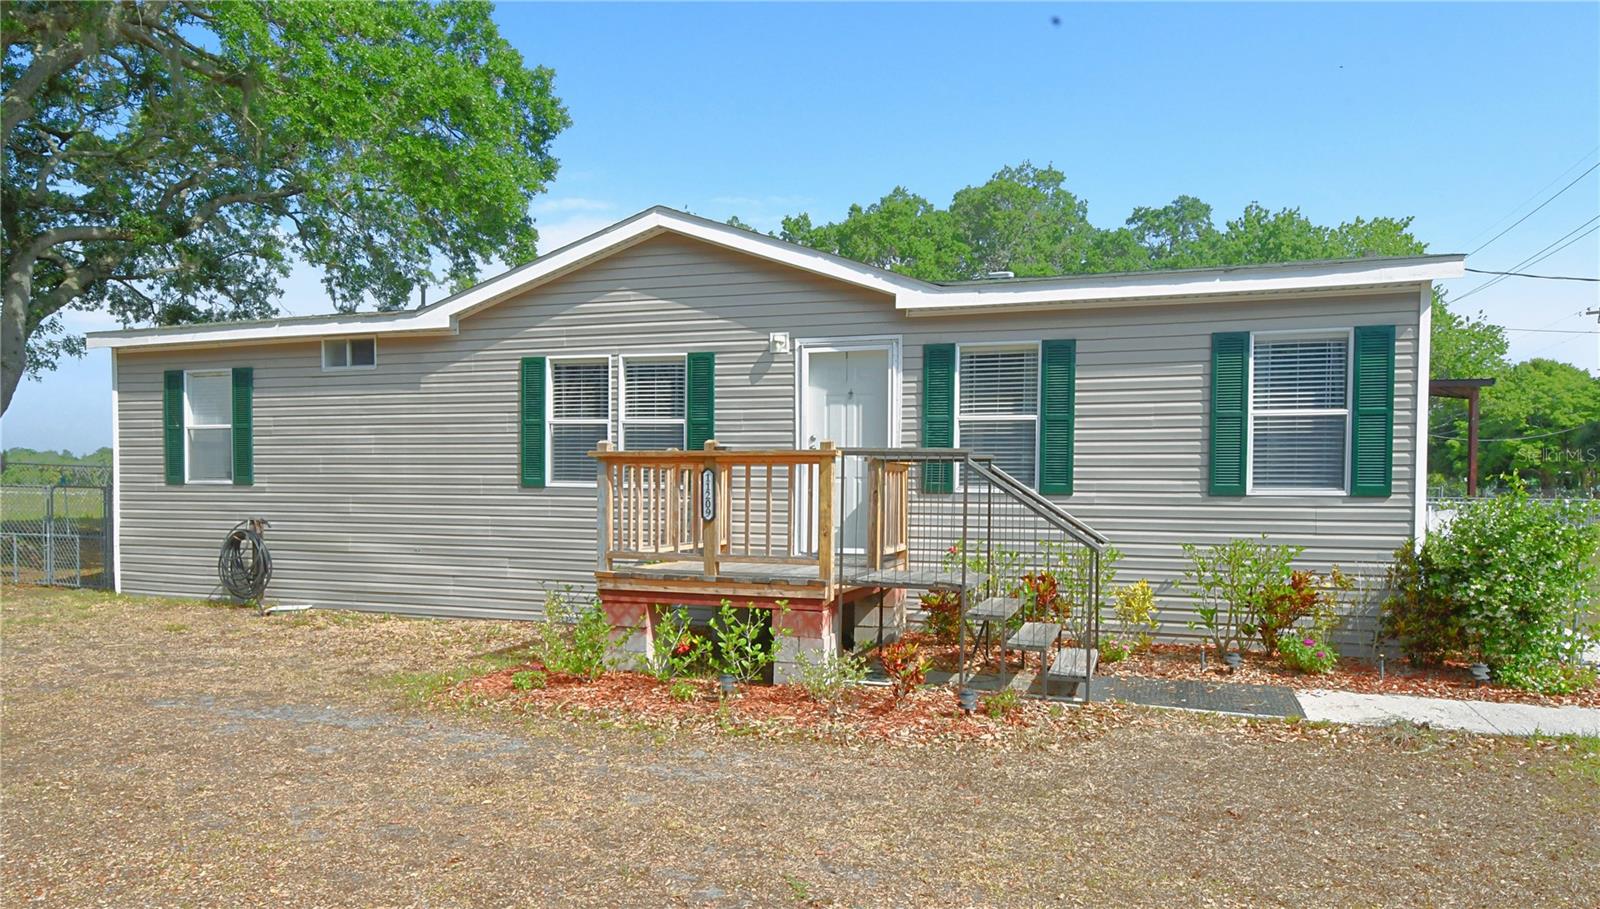 Charming 3-bedroom, 2-bath, double-wide manufactured home nestled in a picturesque, park-like setting.